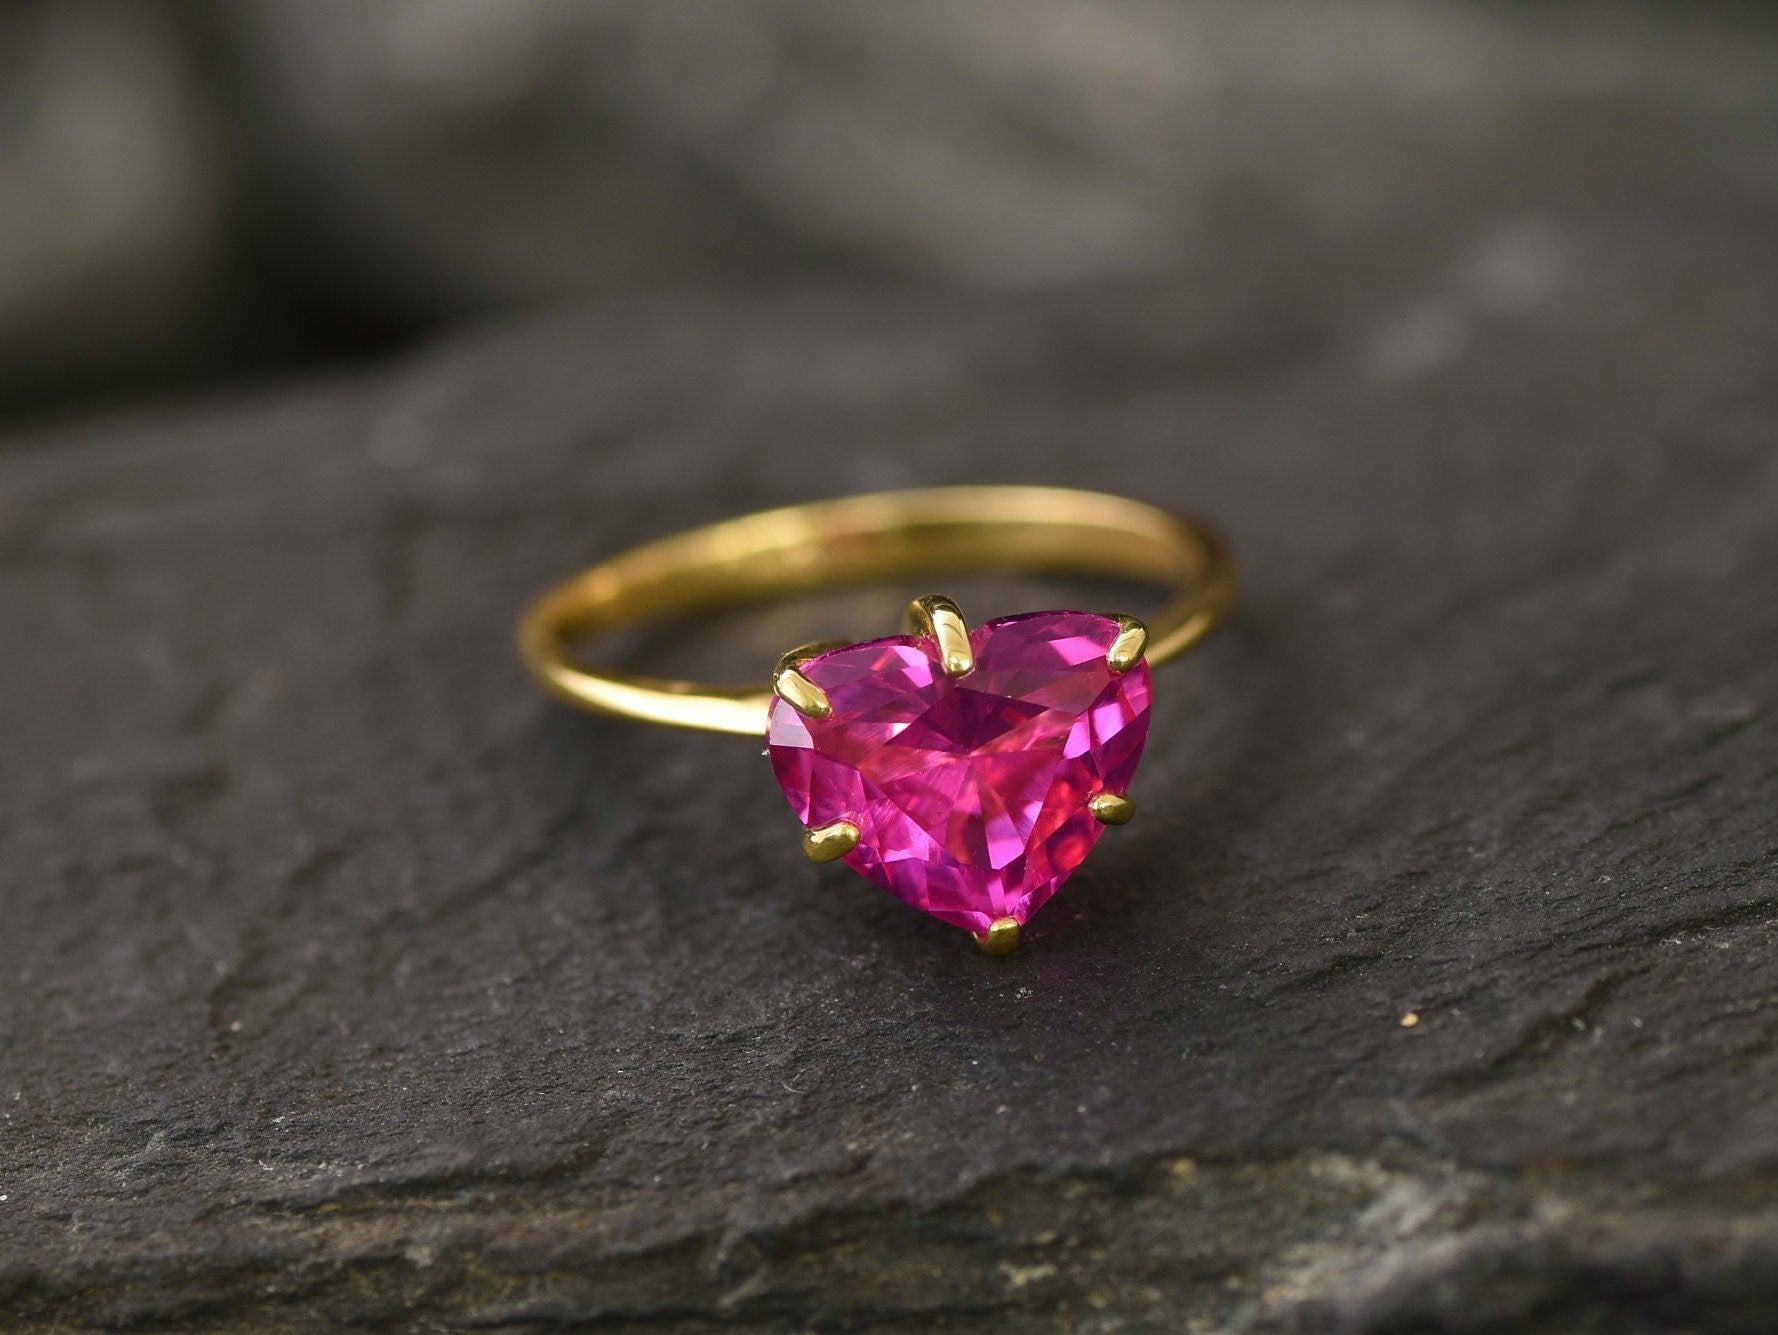 Alexandrite Ring, Created Alexandrite, Gold Heart Ring, Pink Diamond Ring, Love Ring, Engagement Ring, Pink Promise Ring, Gold Vermeil Ring